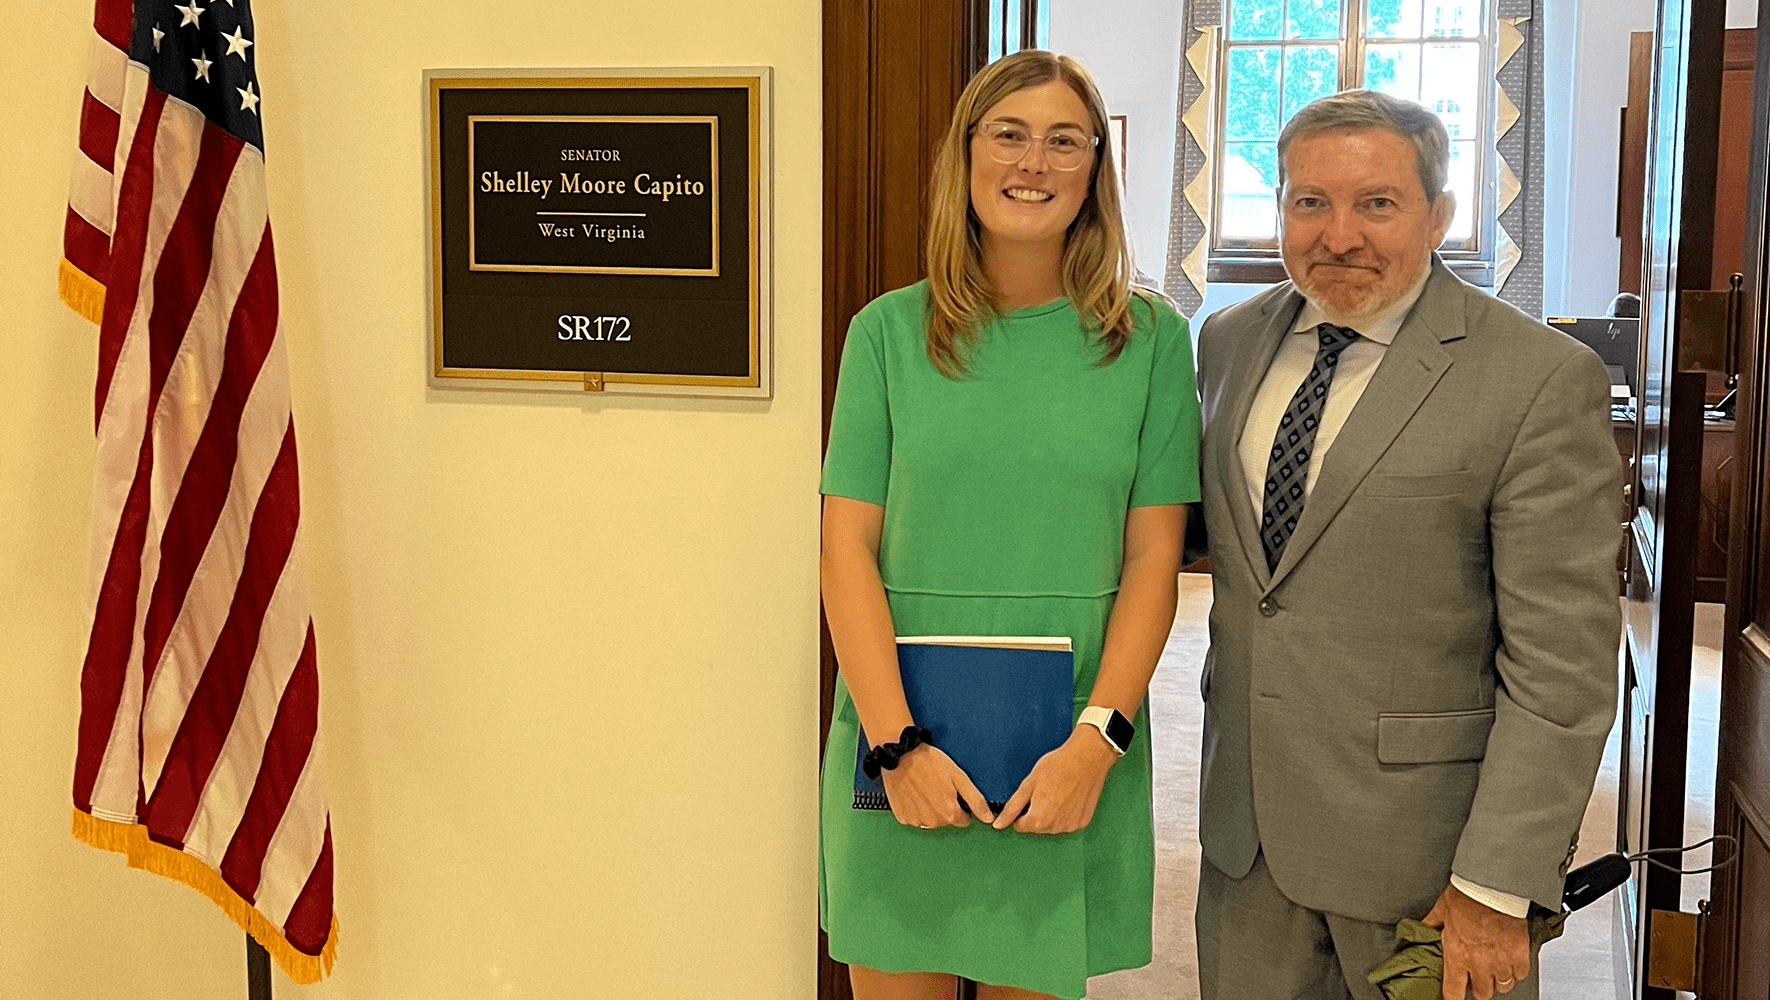 Rabbi Victor Urecki (right) from Charleston, WV meeting in August with a staff member of the office of Senator Shelley Moore Capito (R-WV).
(HIAS)